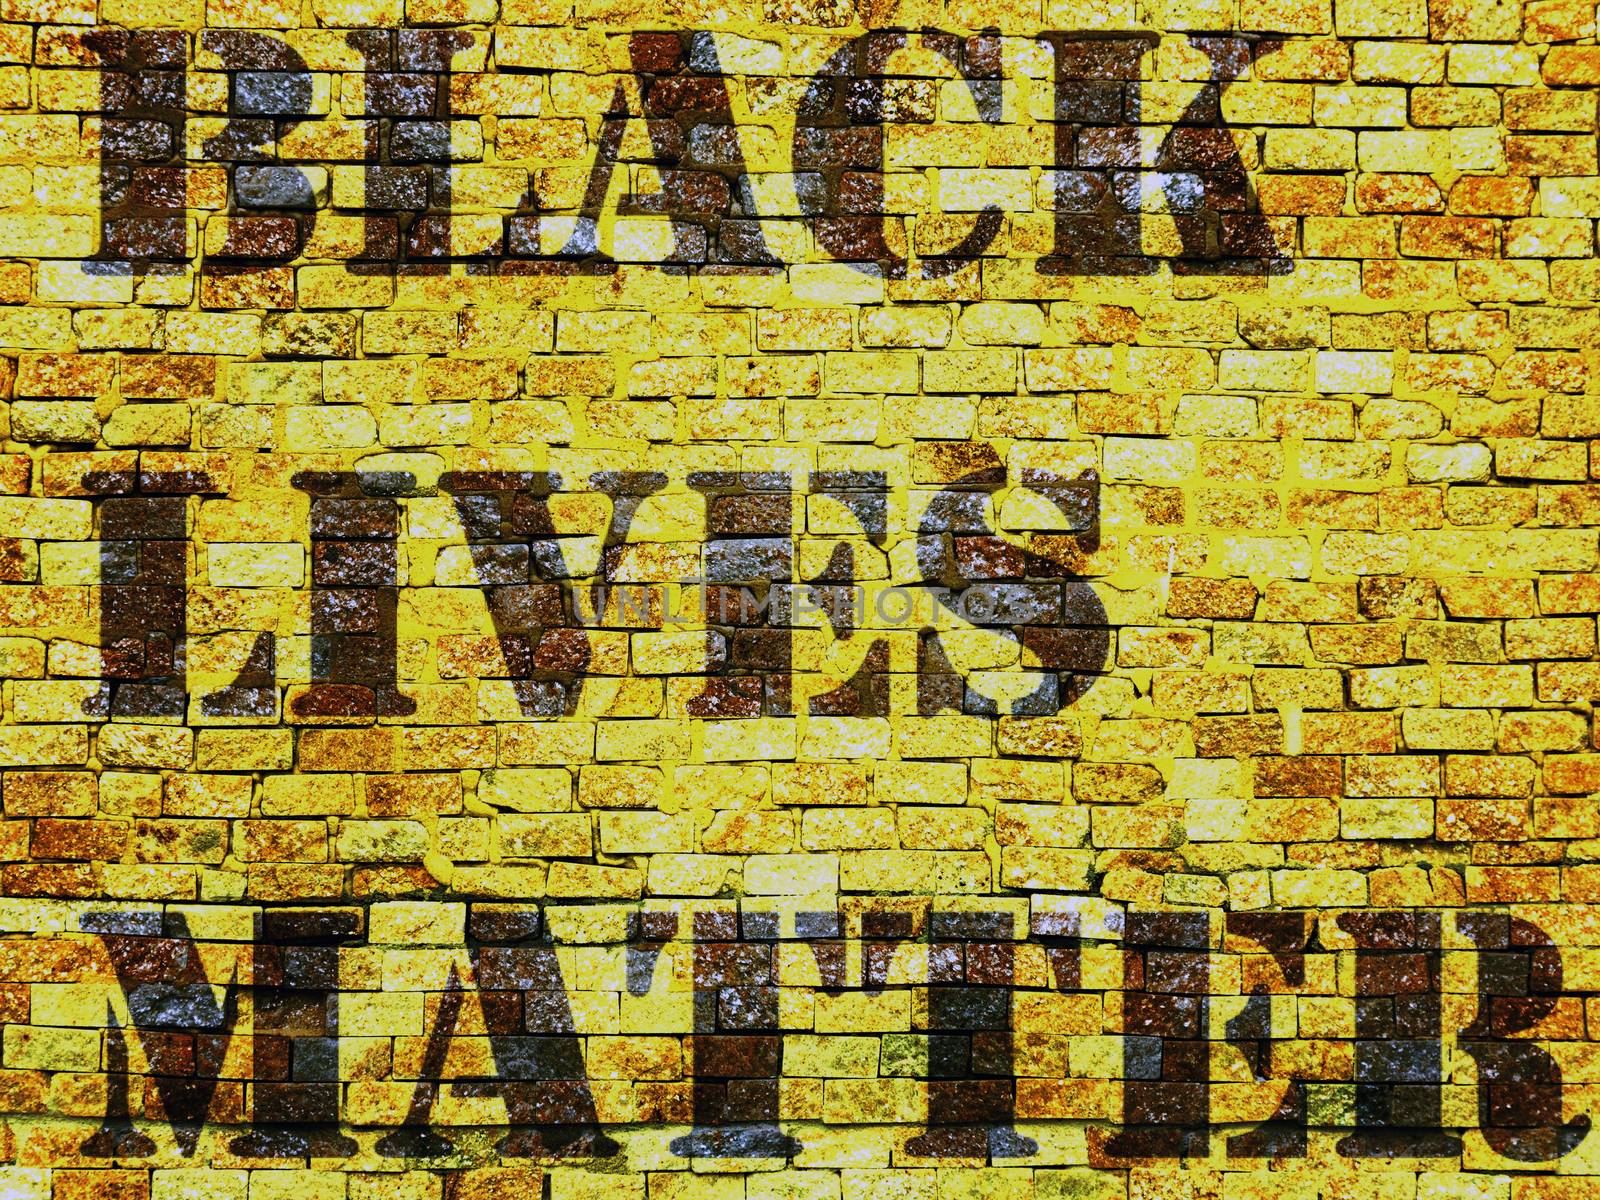 Black Lives Matter slogan protestors anti Black racism african American yellow stencil pattern facade texture of stained old brick wall background, grungy rusty blocks of stone-work